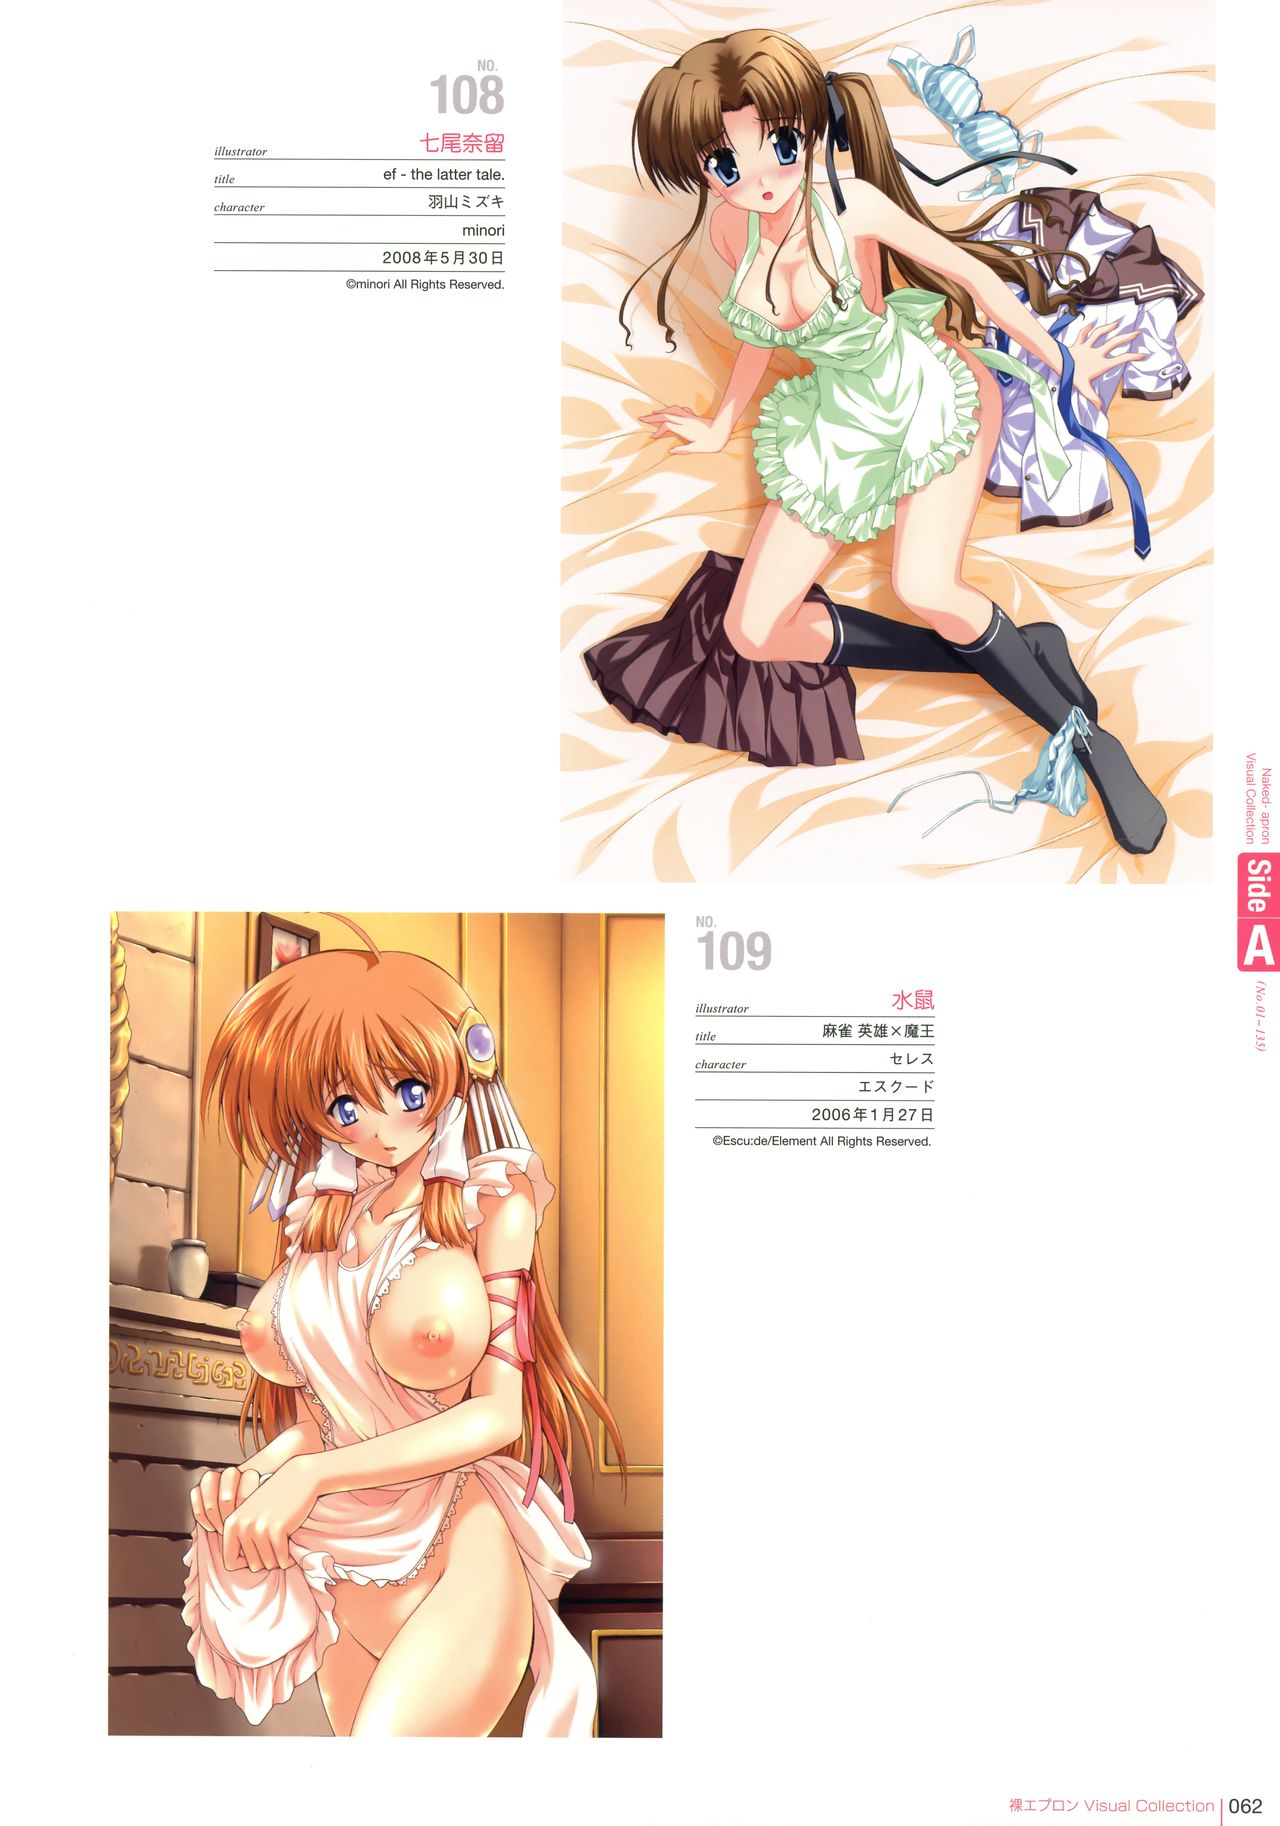 Naked Apron Visual Collection 裸エプロンVisual Collection